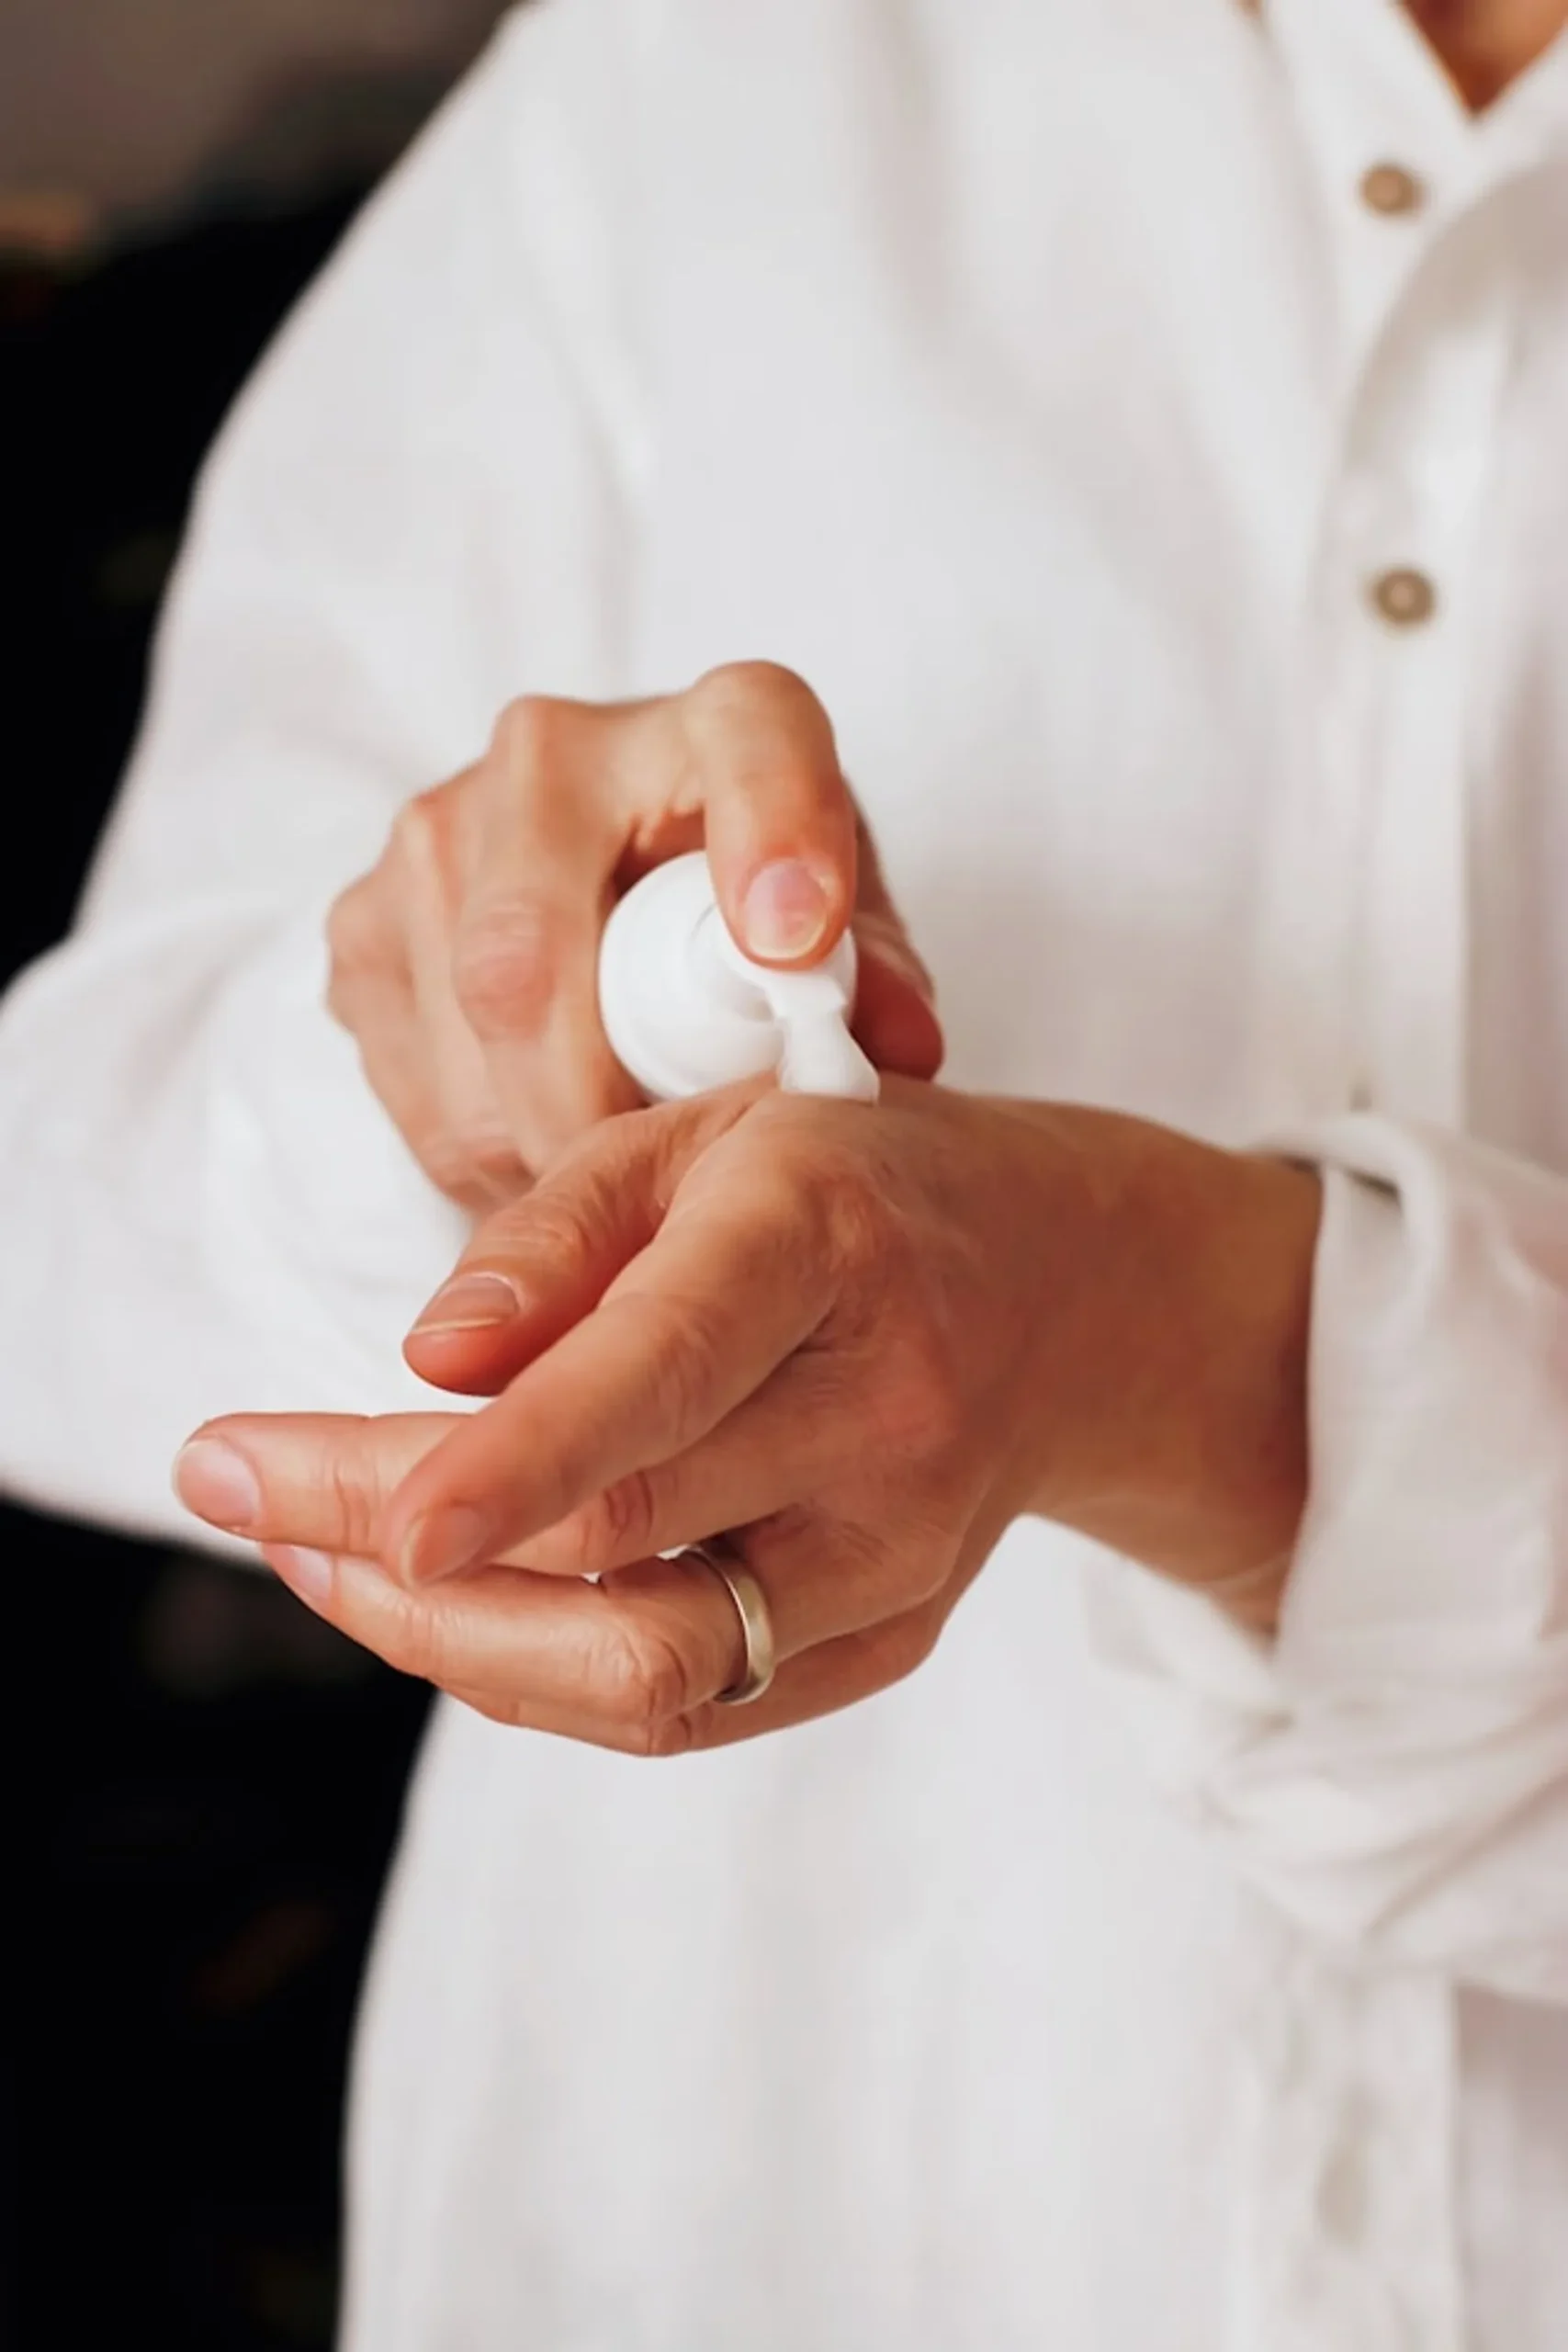   a woman with a white shirt, and a gold ring on her finger, putting a skincare product on the palm.